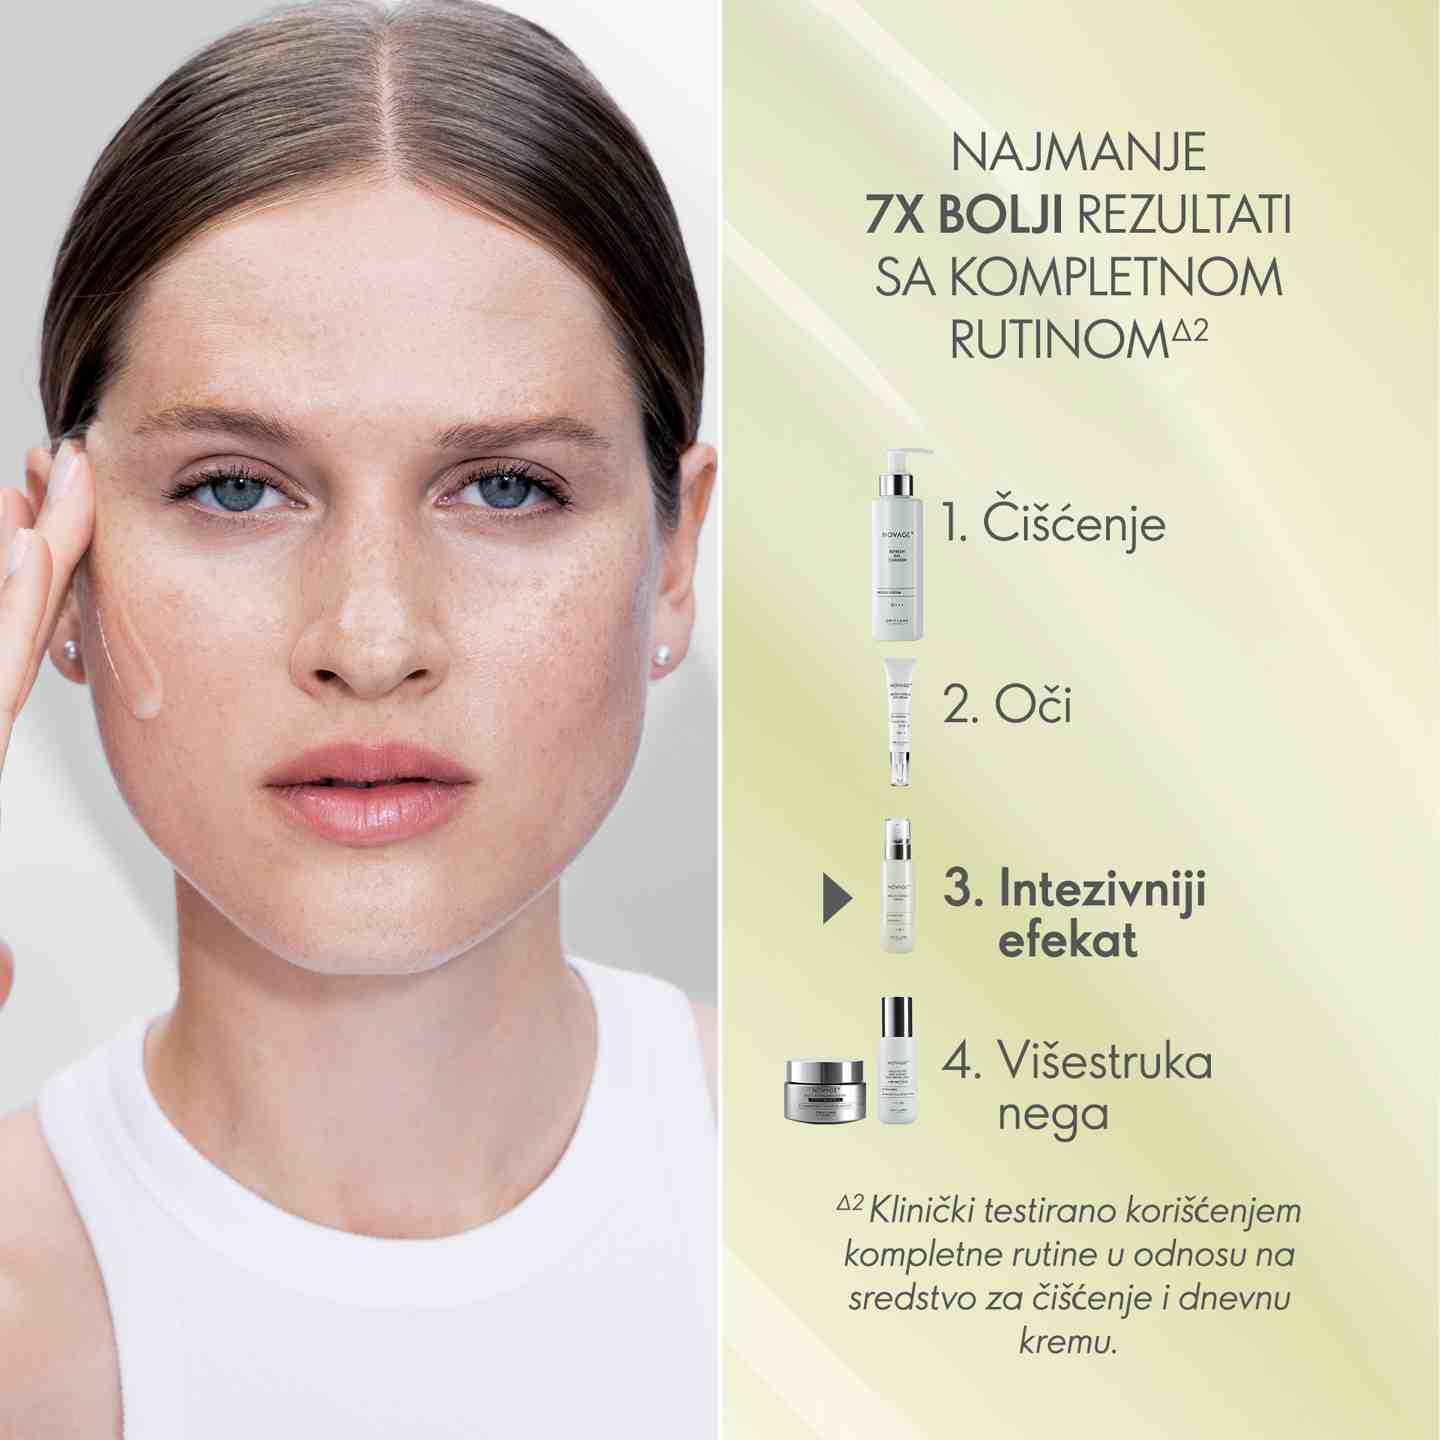 https://media-cdn.oriflame.com/productImage?externalMediaId=product-management-media%2fProducts%2f41040%2fRS%2f41040_5.png&id=17551273&version=2